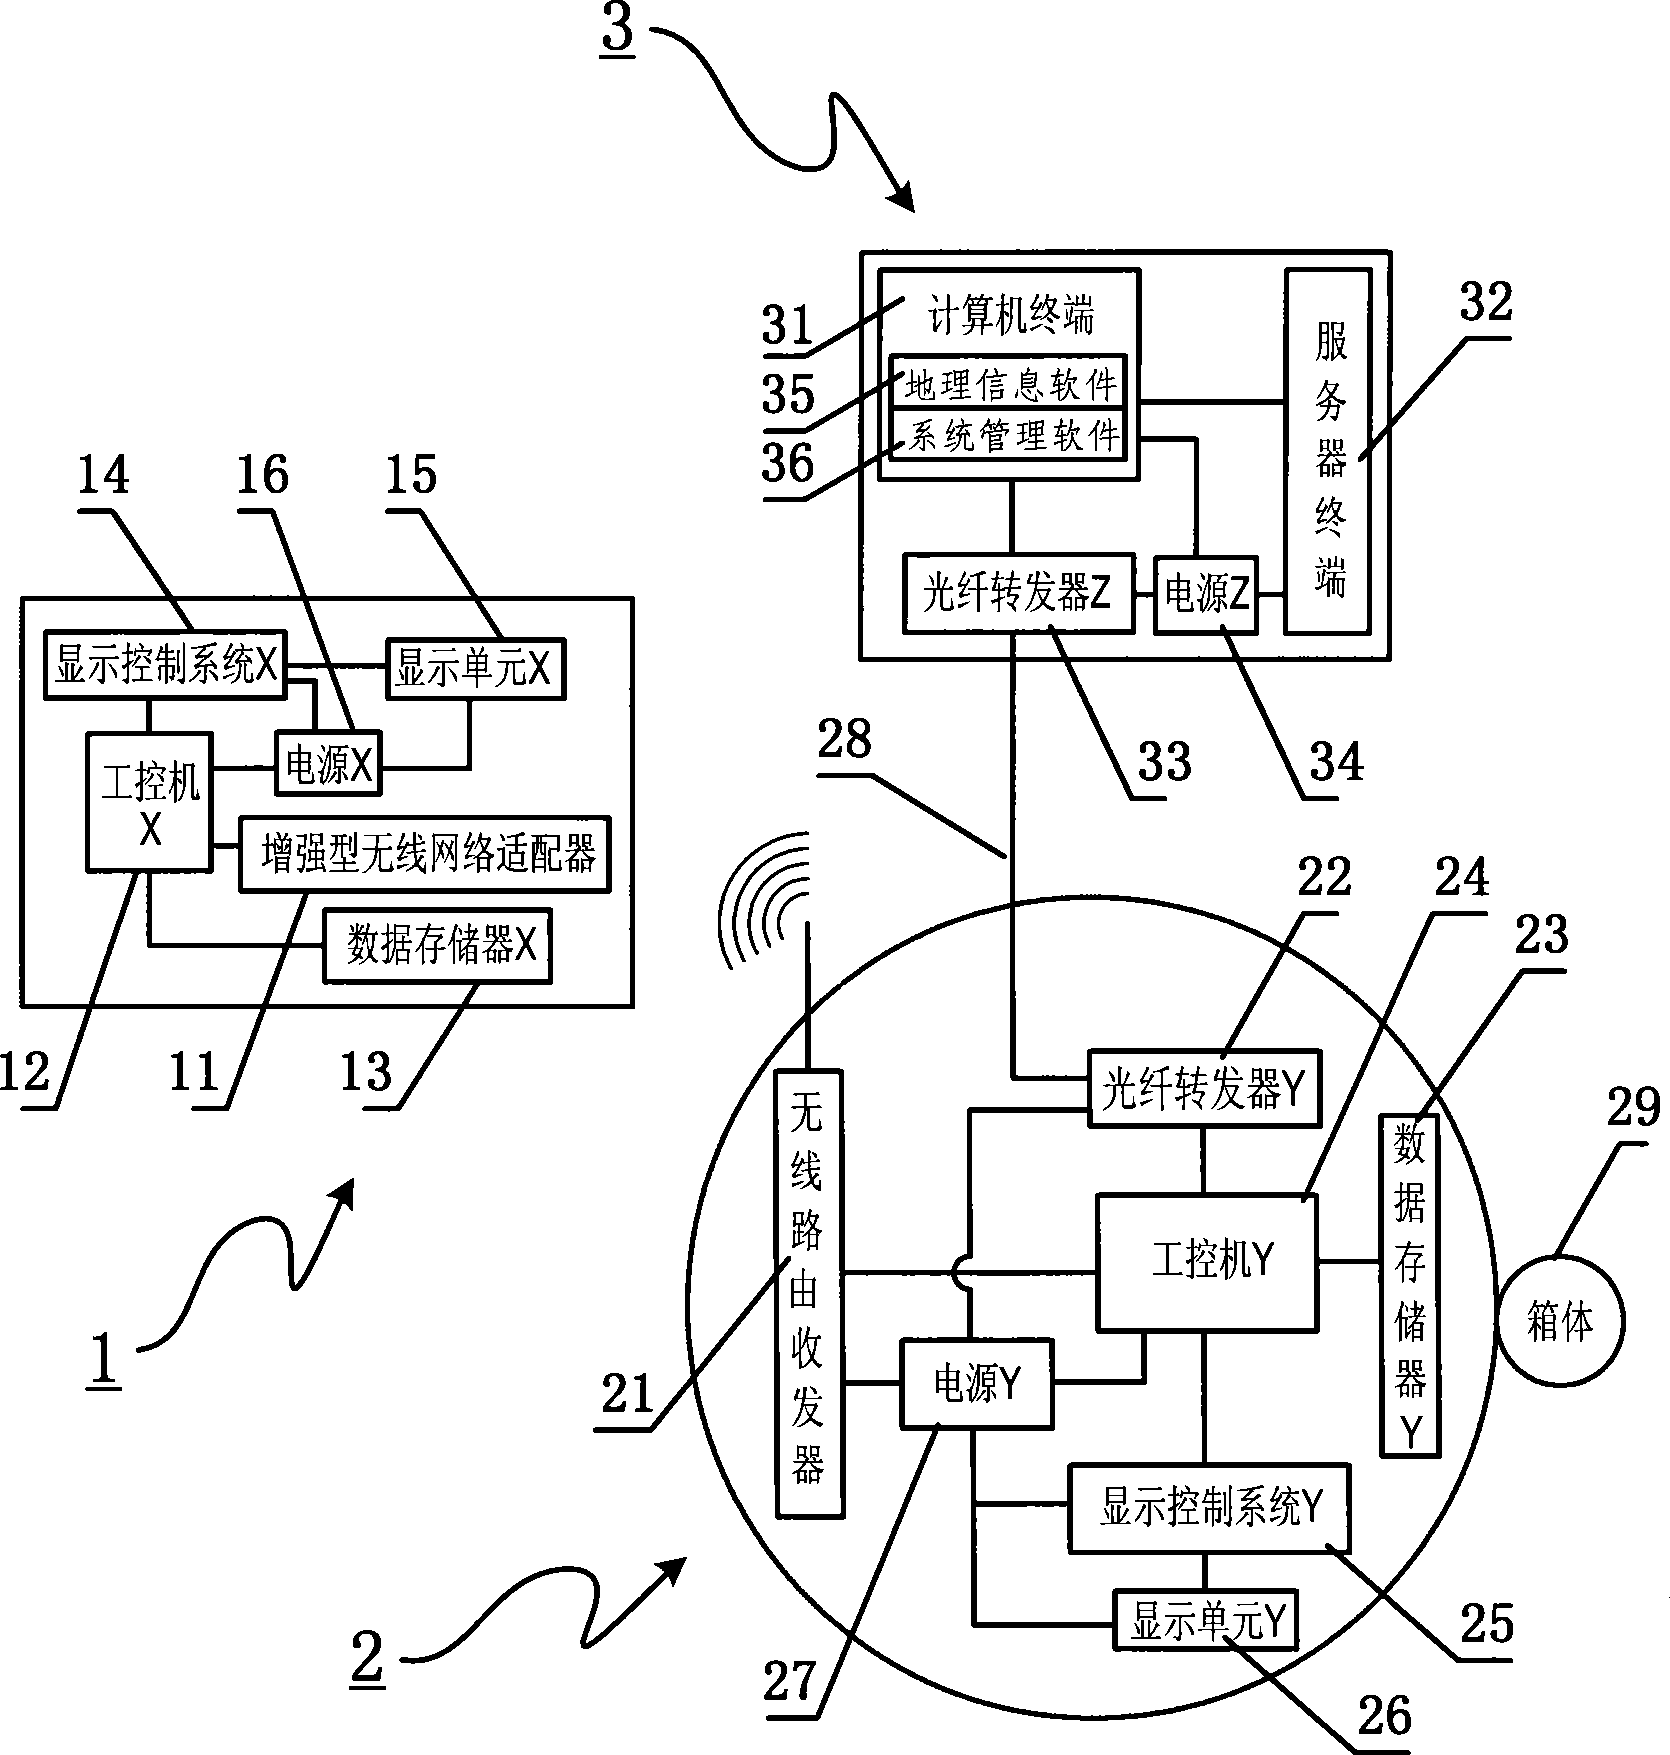 Digital public transport information publishing and cluster controlling method and device